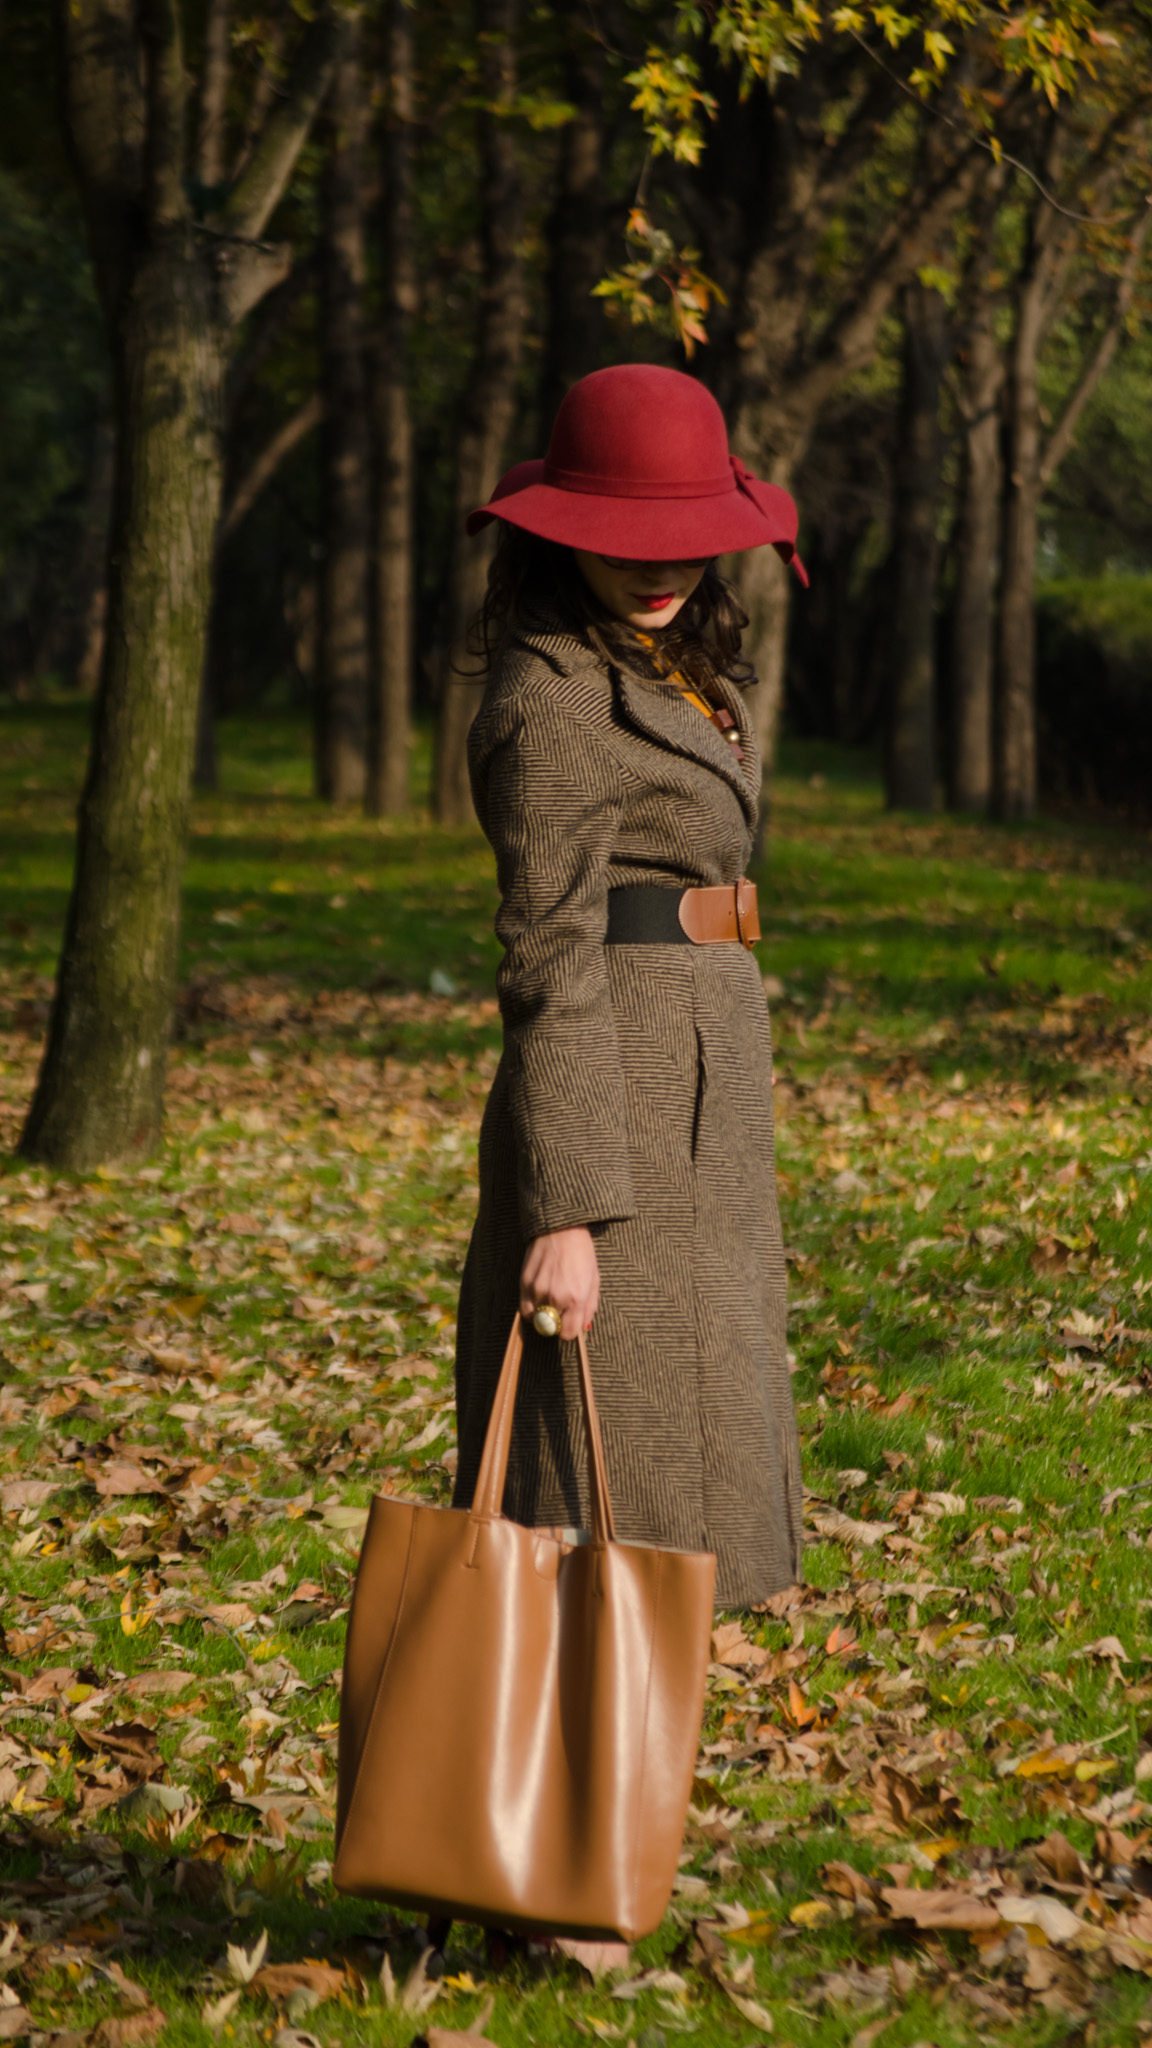 fall essential wardrobe items burgundy hat turtleneck sweater mustard brown pattern coat over-sized bag belt shoes heels autumn scenery leaves mom jeans H&M thrifted 